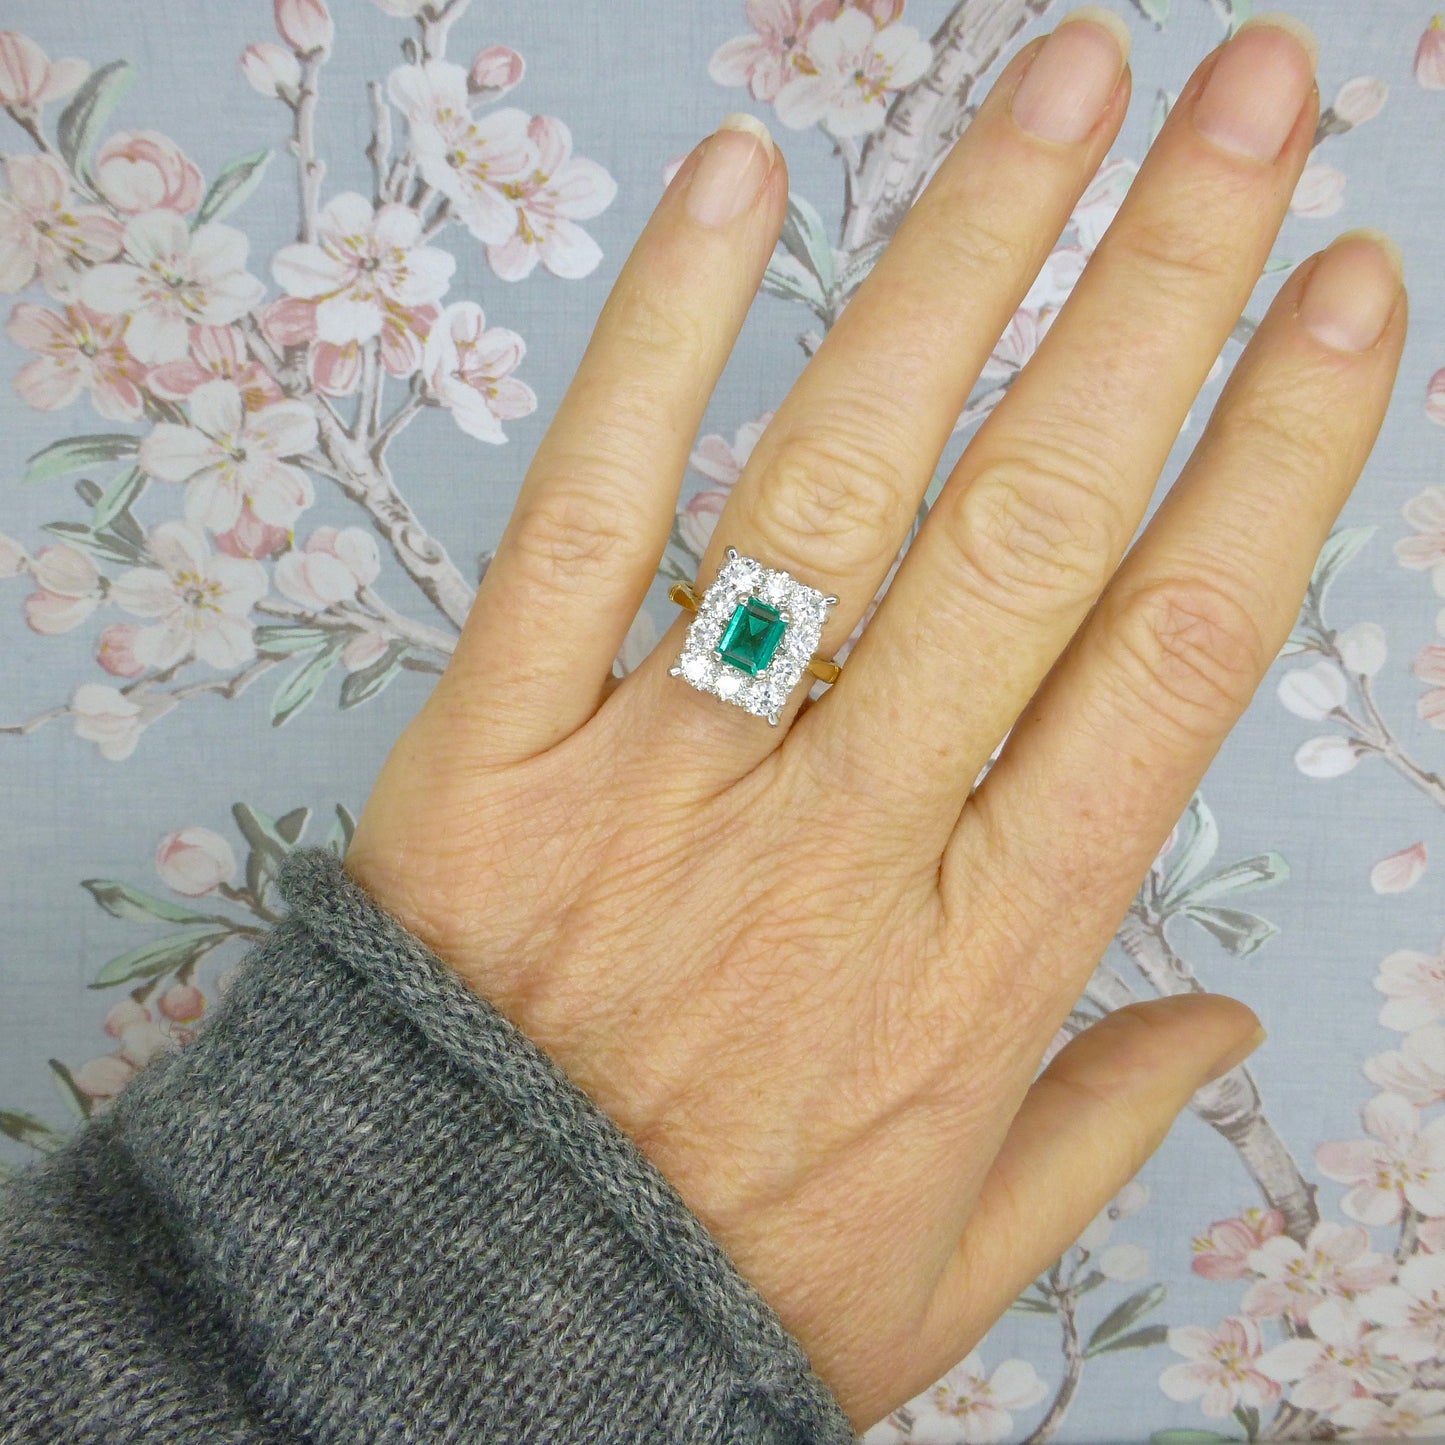 Stunning Vintage 18ct gold Emerald & Diamond cluster ring ~ With Valuation appraisal